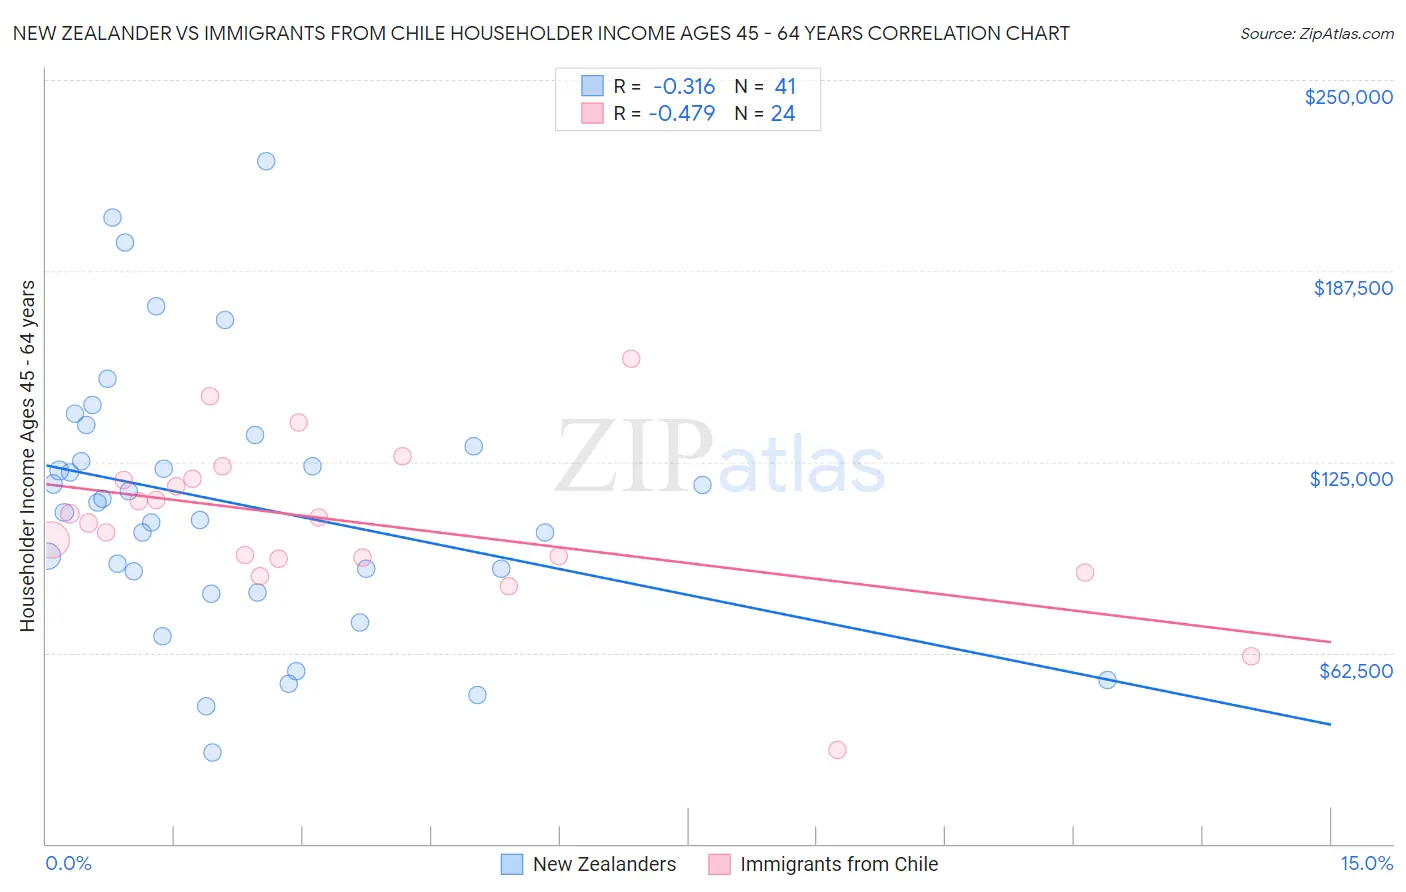 New Zealander vs Immigrants from Chile Householder Income Ages 45 - 64 years